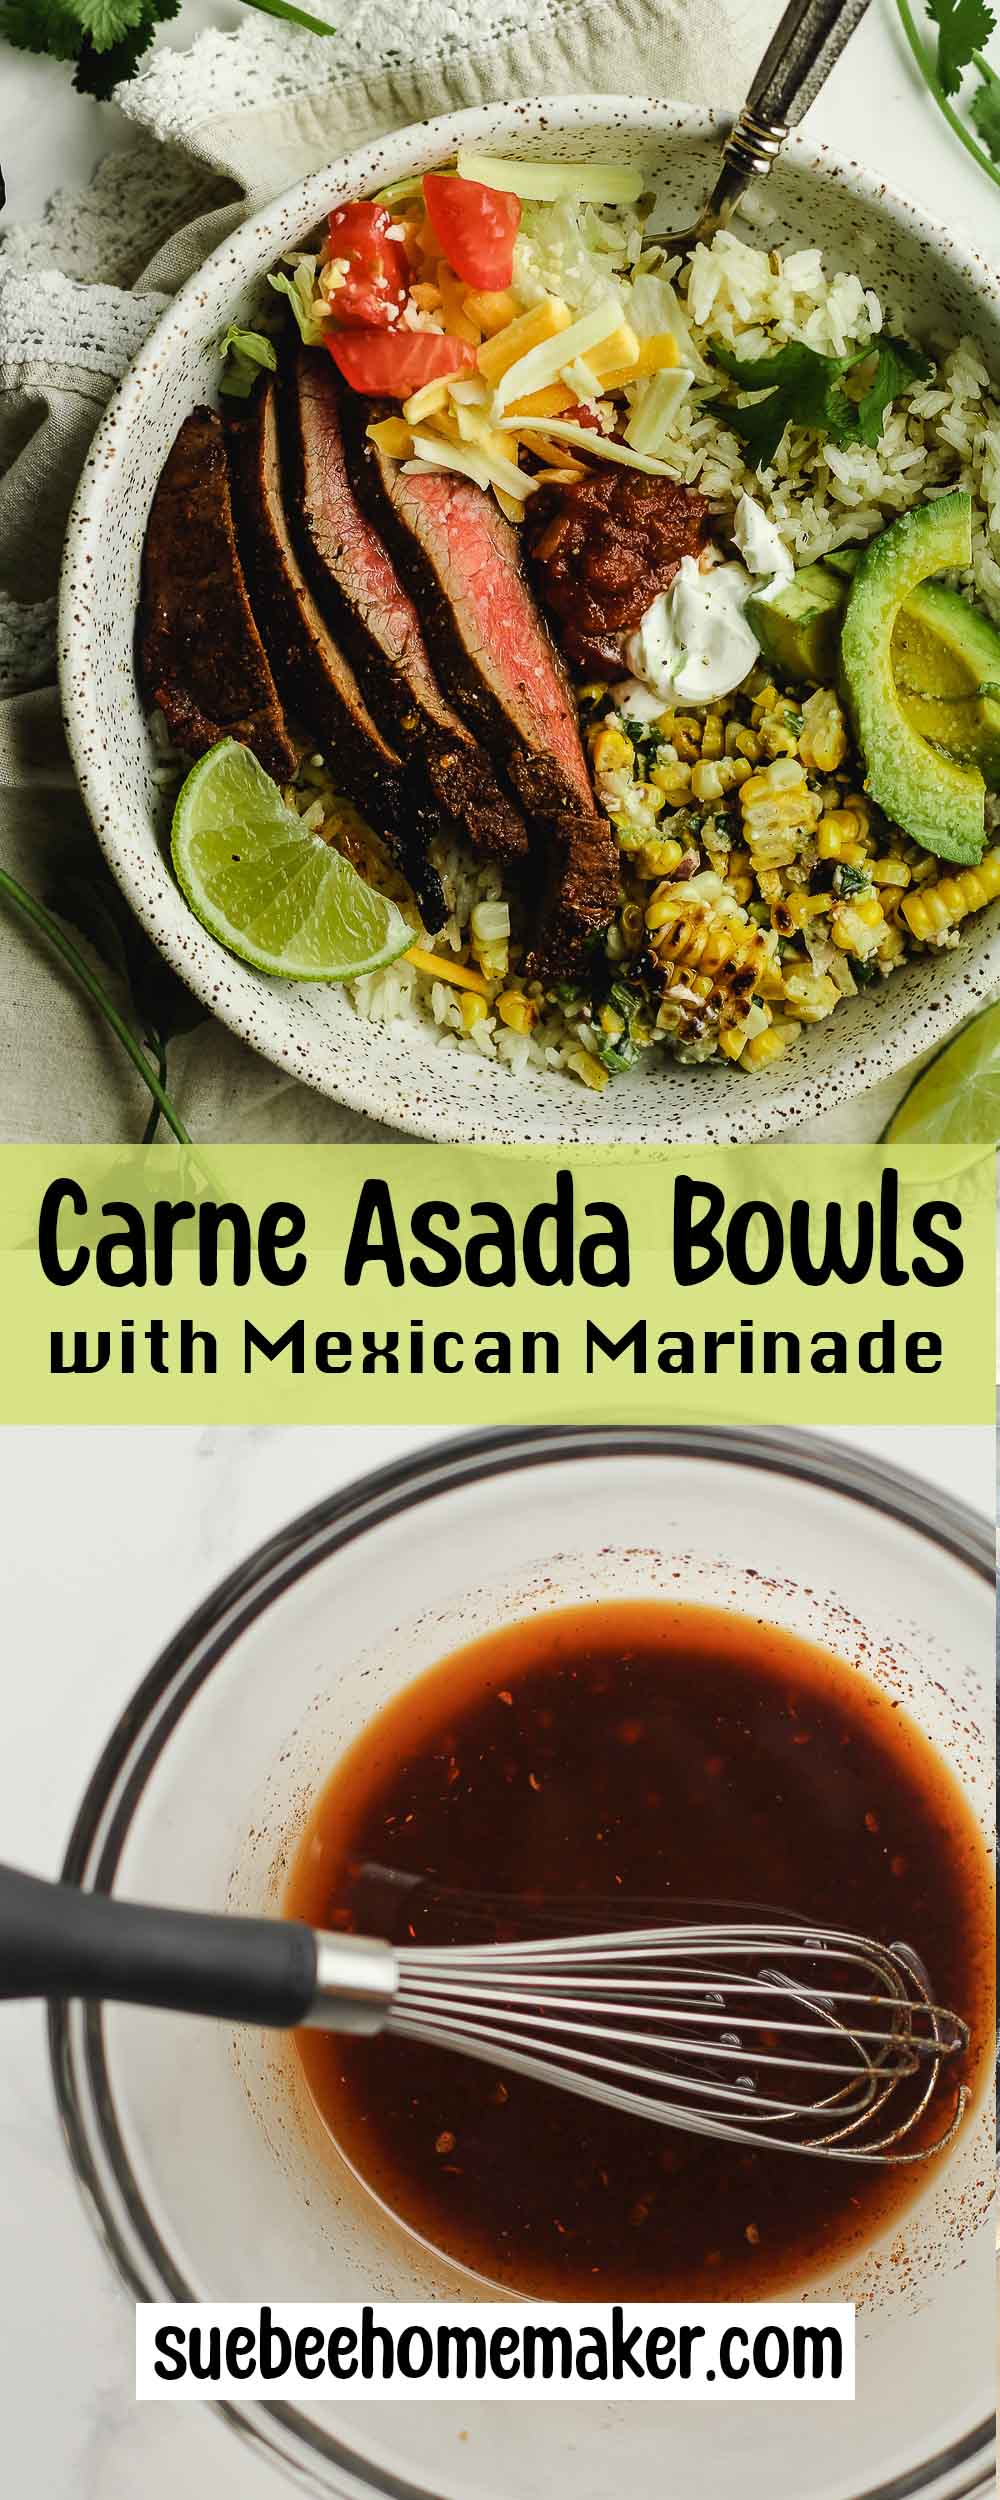 A collage of photos for carne asada bowls with Mexican marinade.